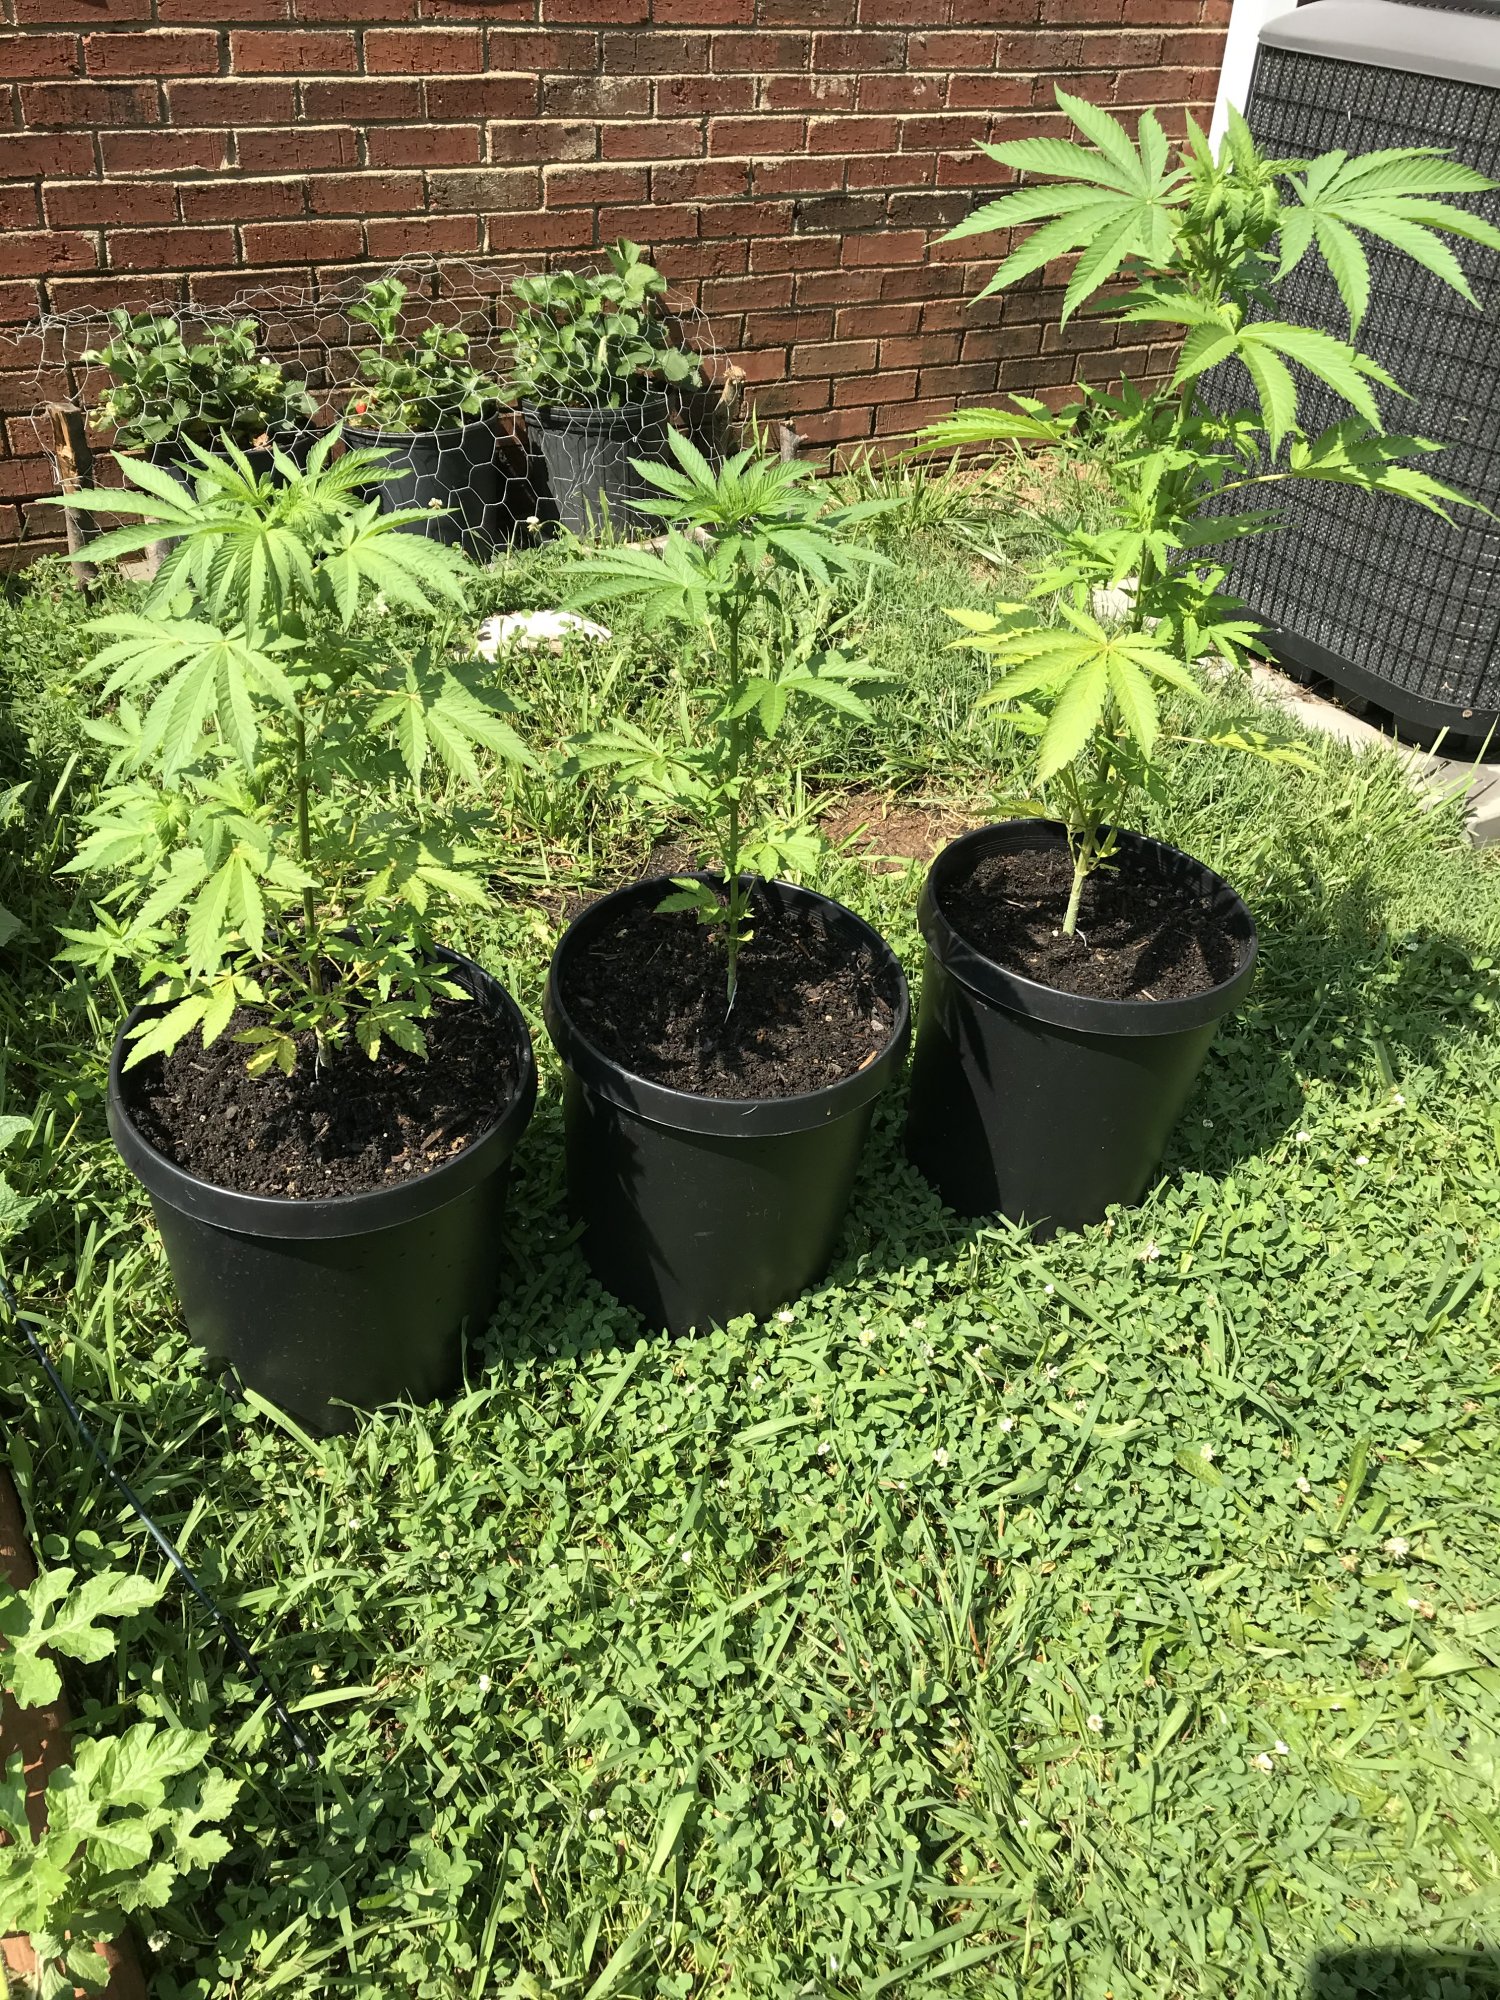 Help a young grower understand 3